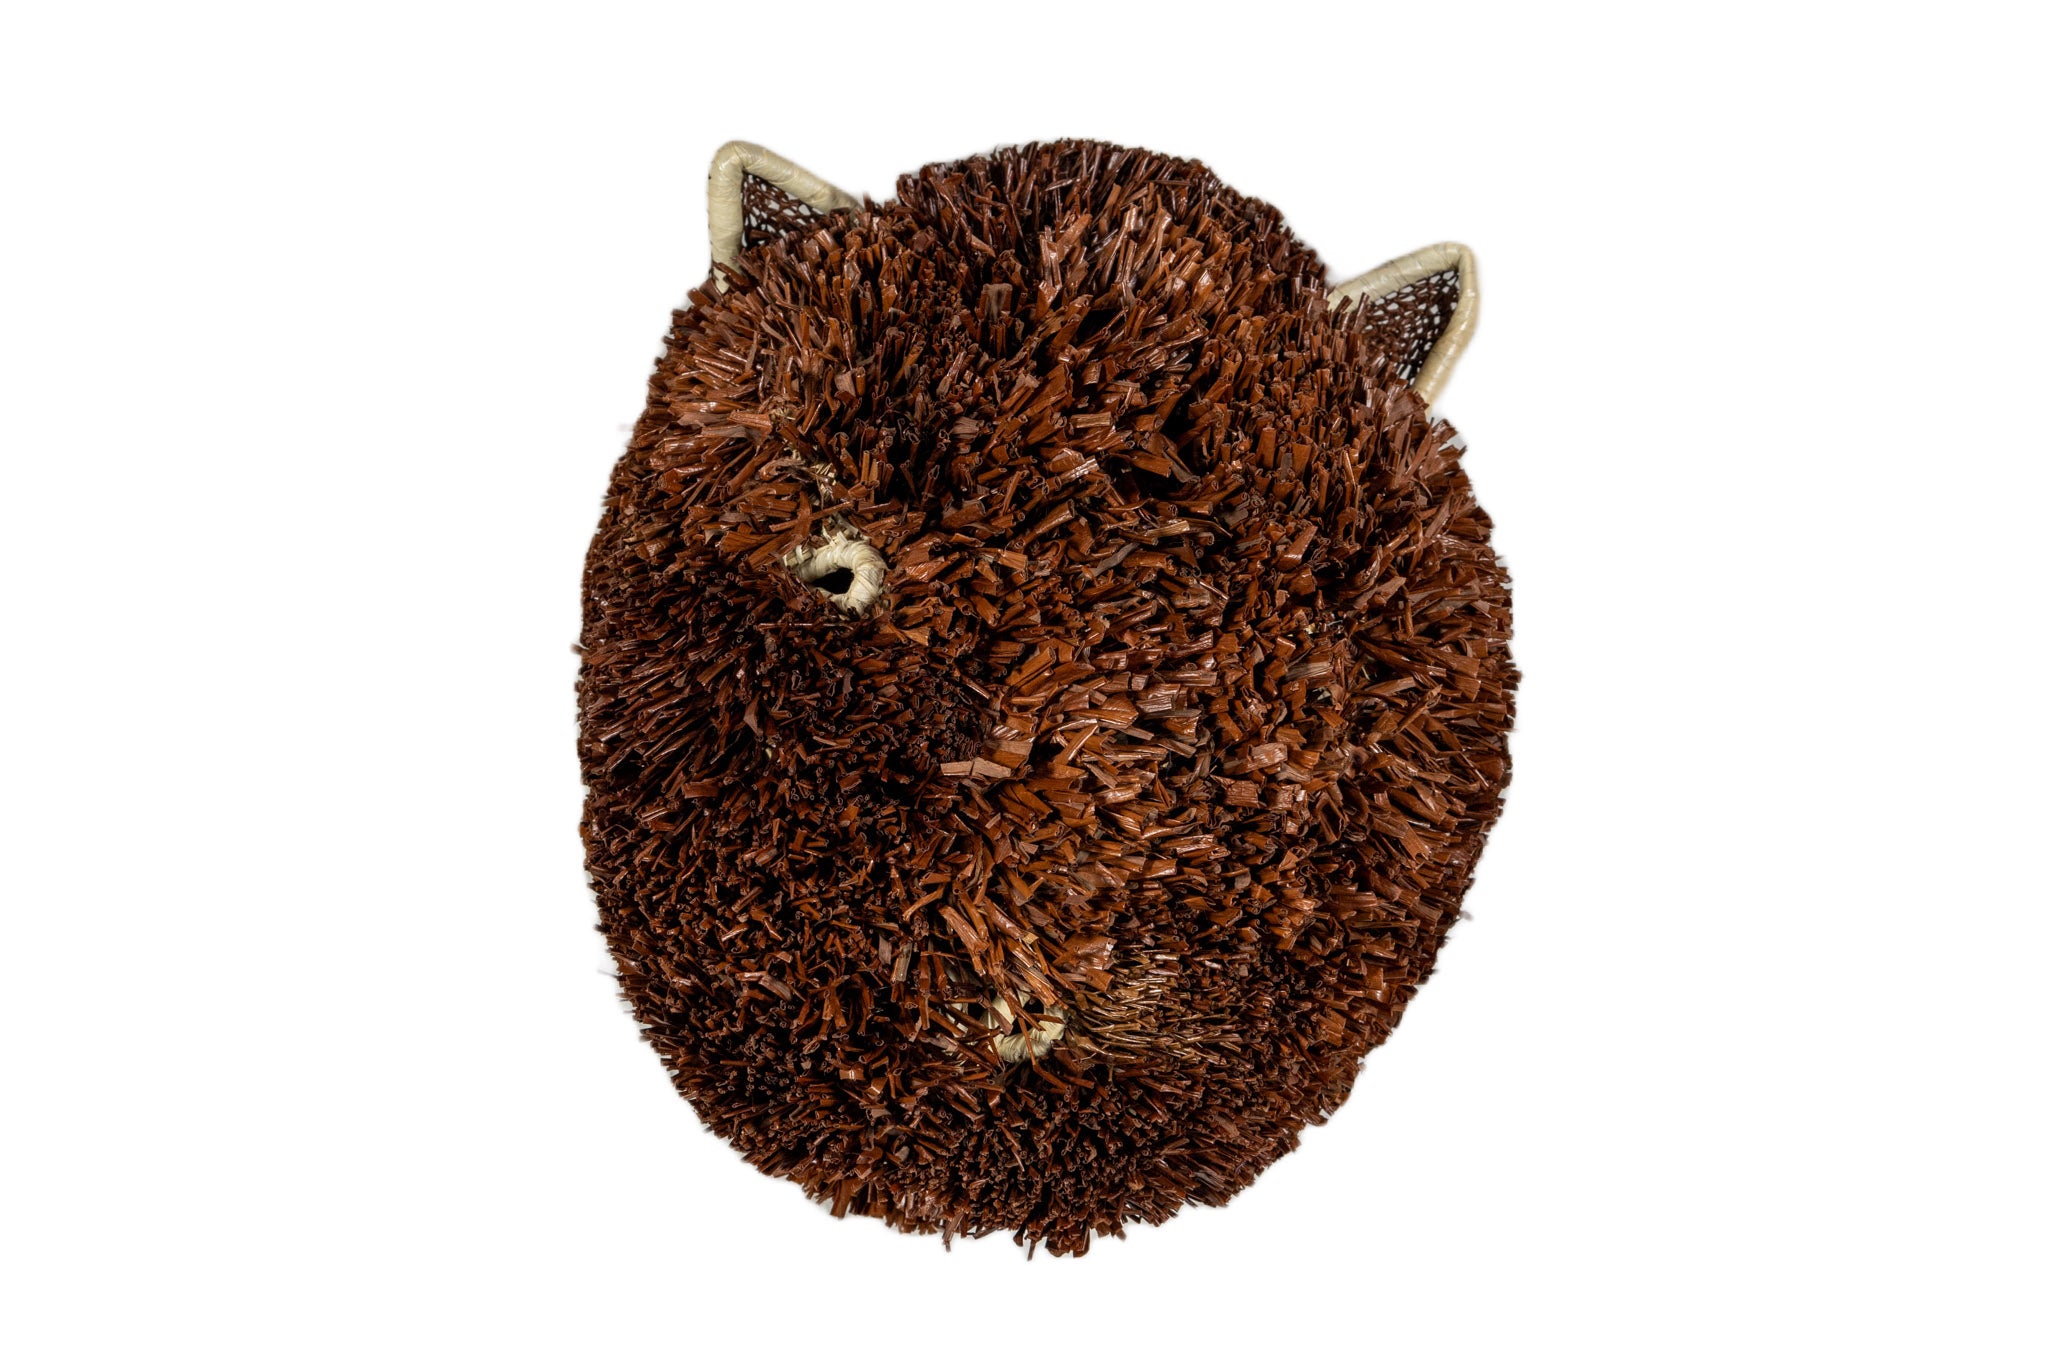 Brown and White Labradoodle Dog Mask